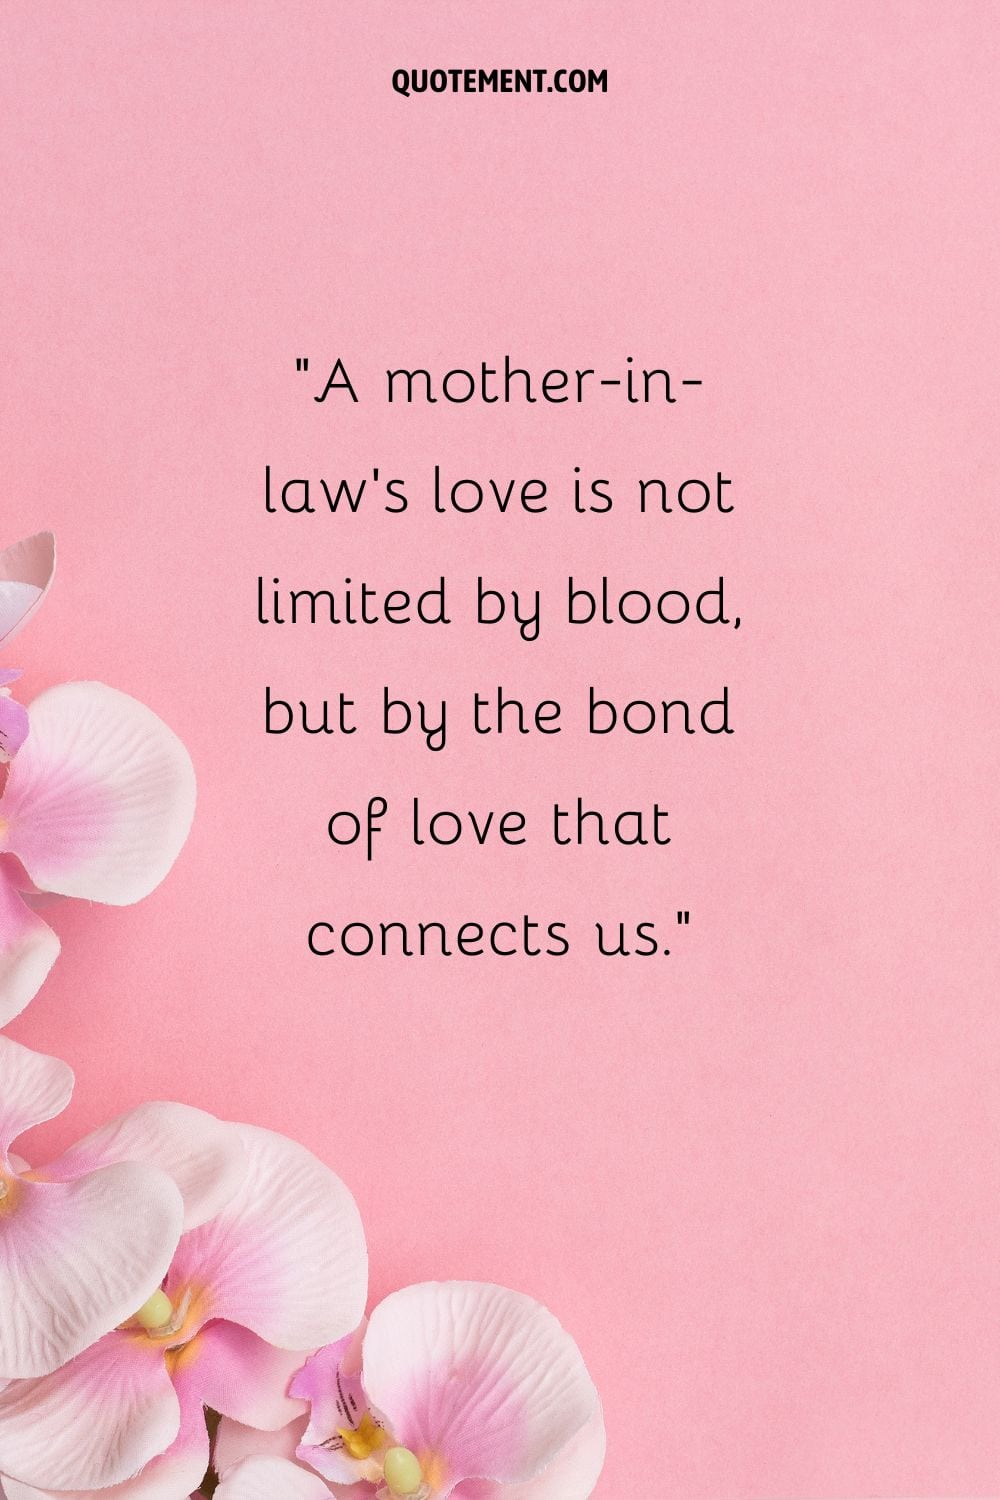 Lovely quote surrounded by abundant pink flowers